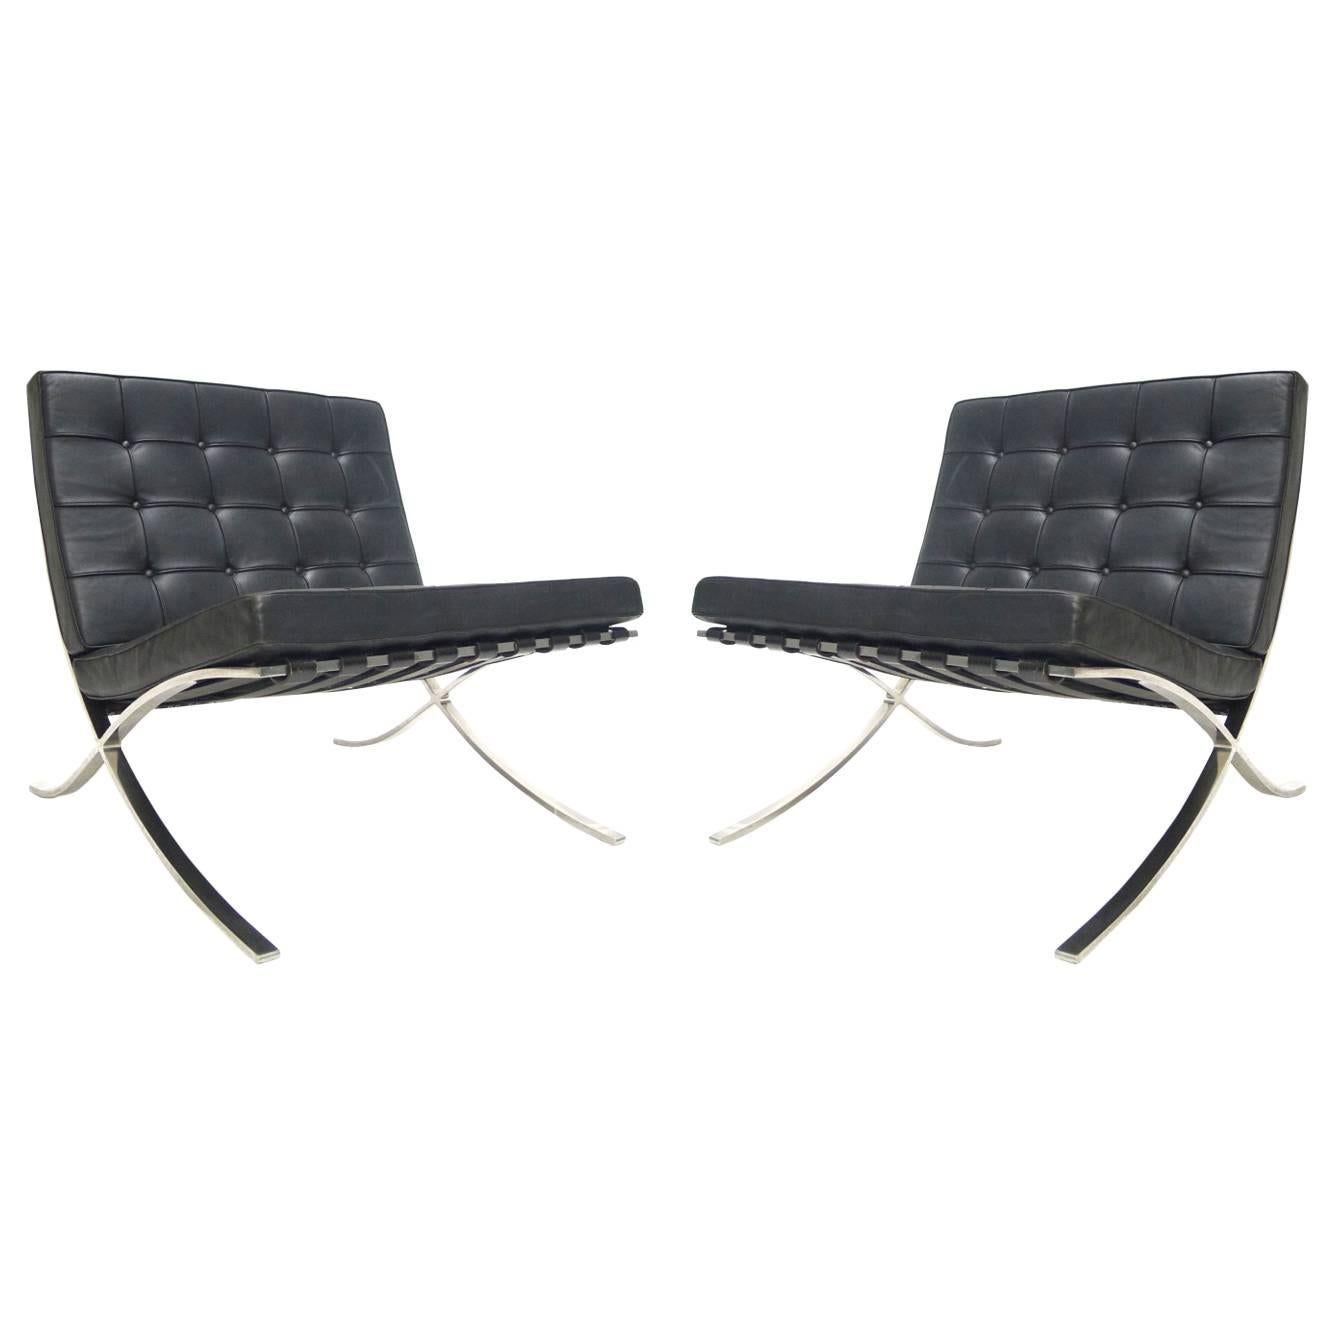 An iconic Knoll Barcelona chair in black leather. All original.